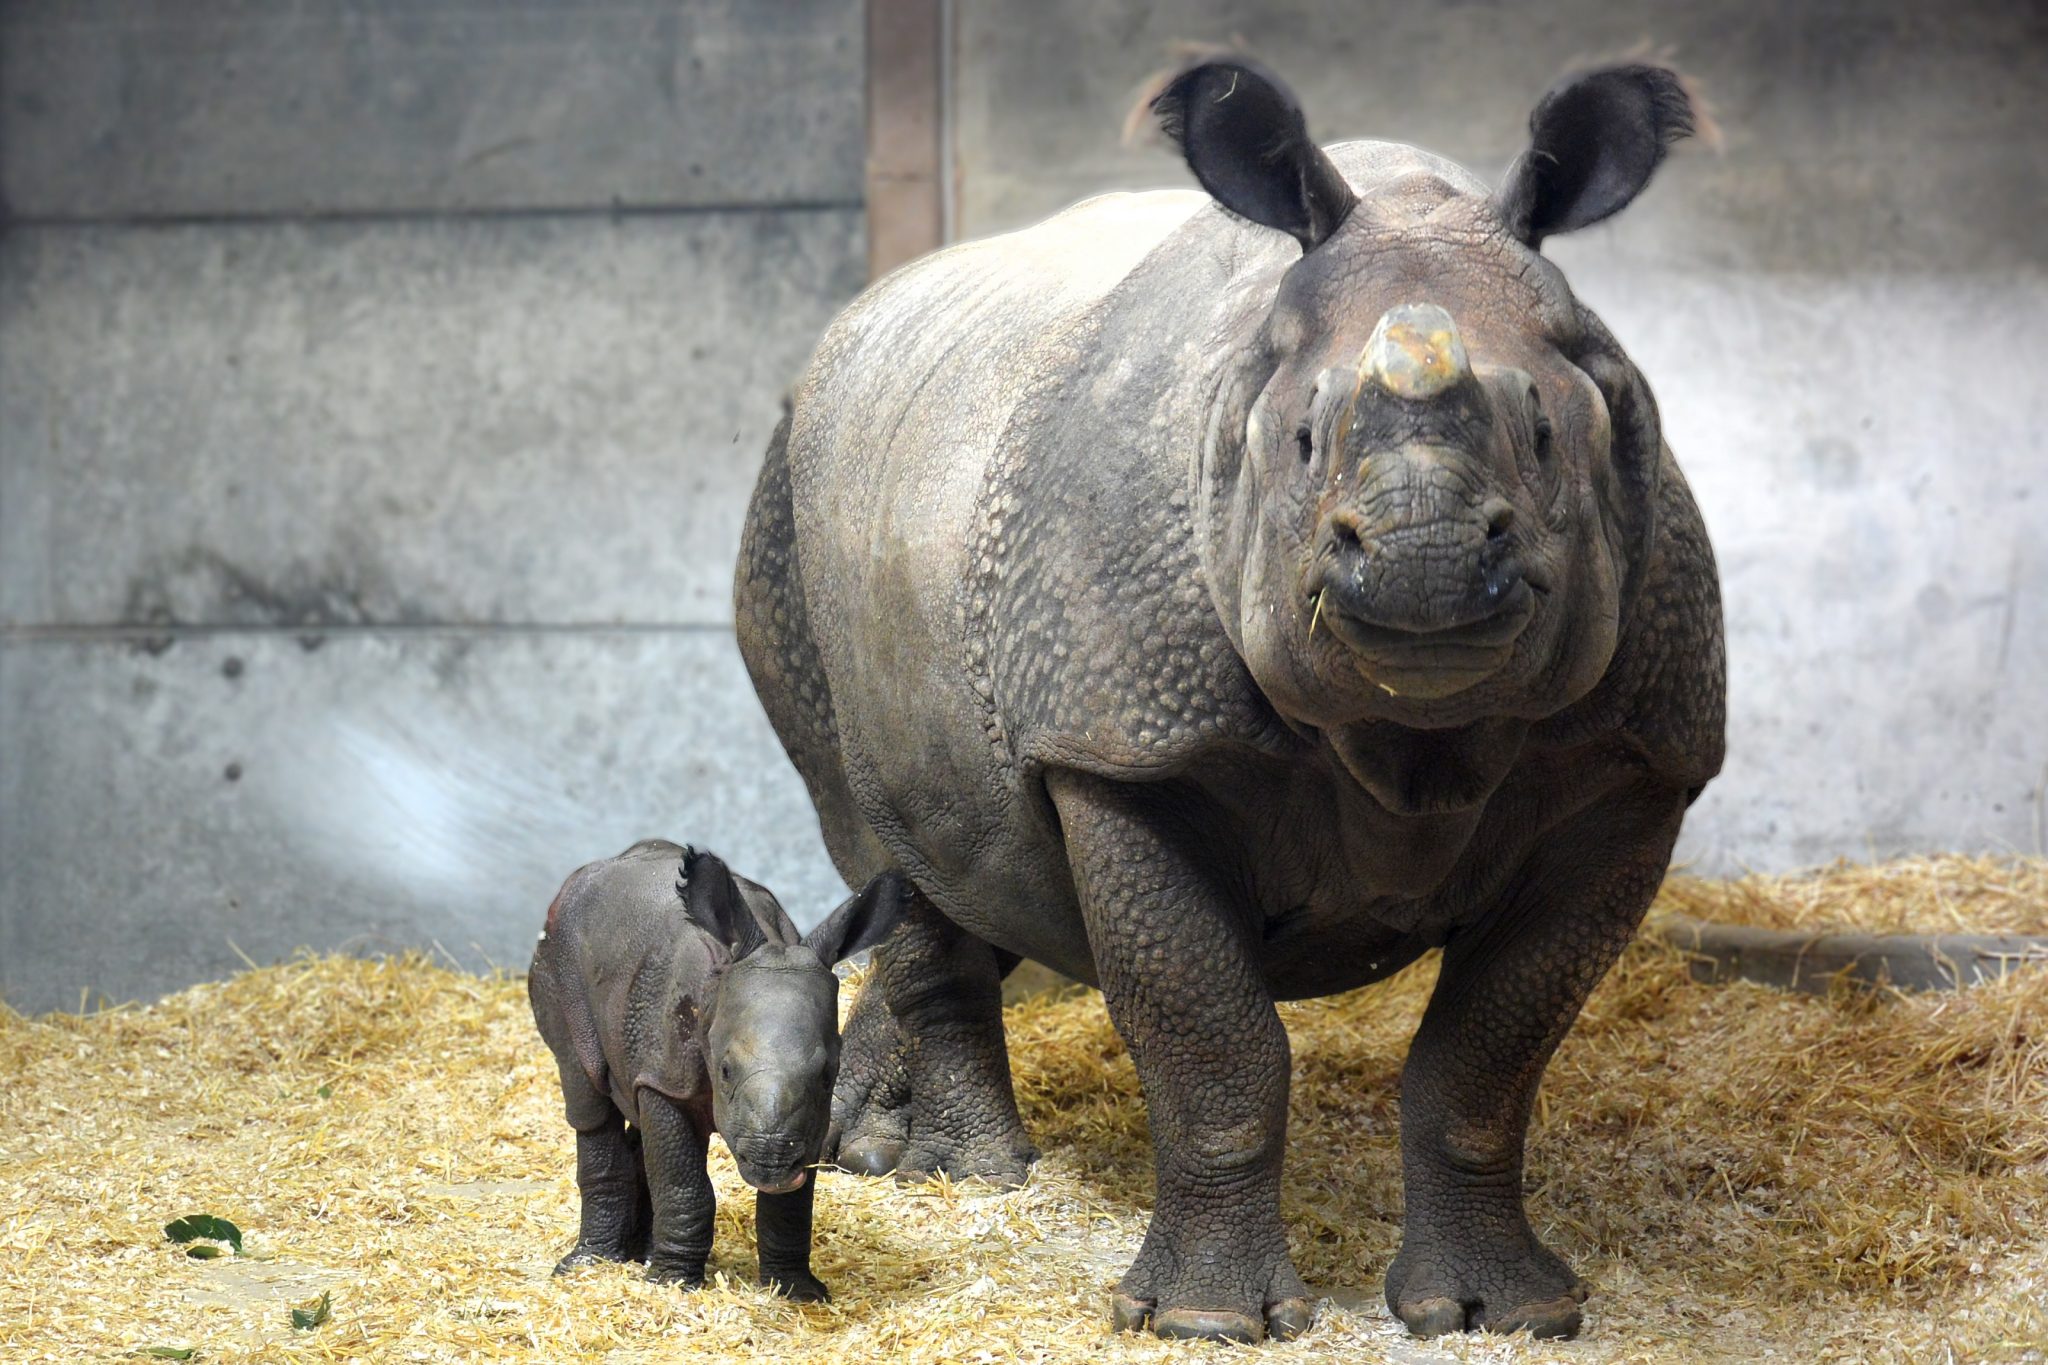 We have a new Baby Rhino at our Denver Zoo!